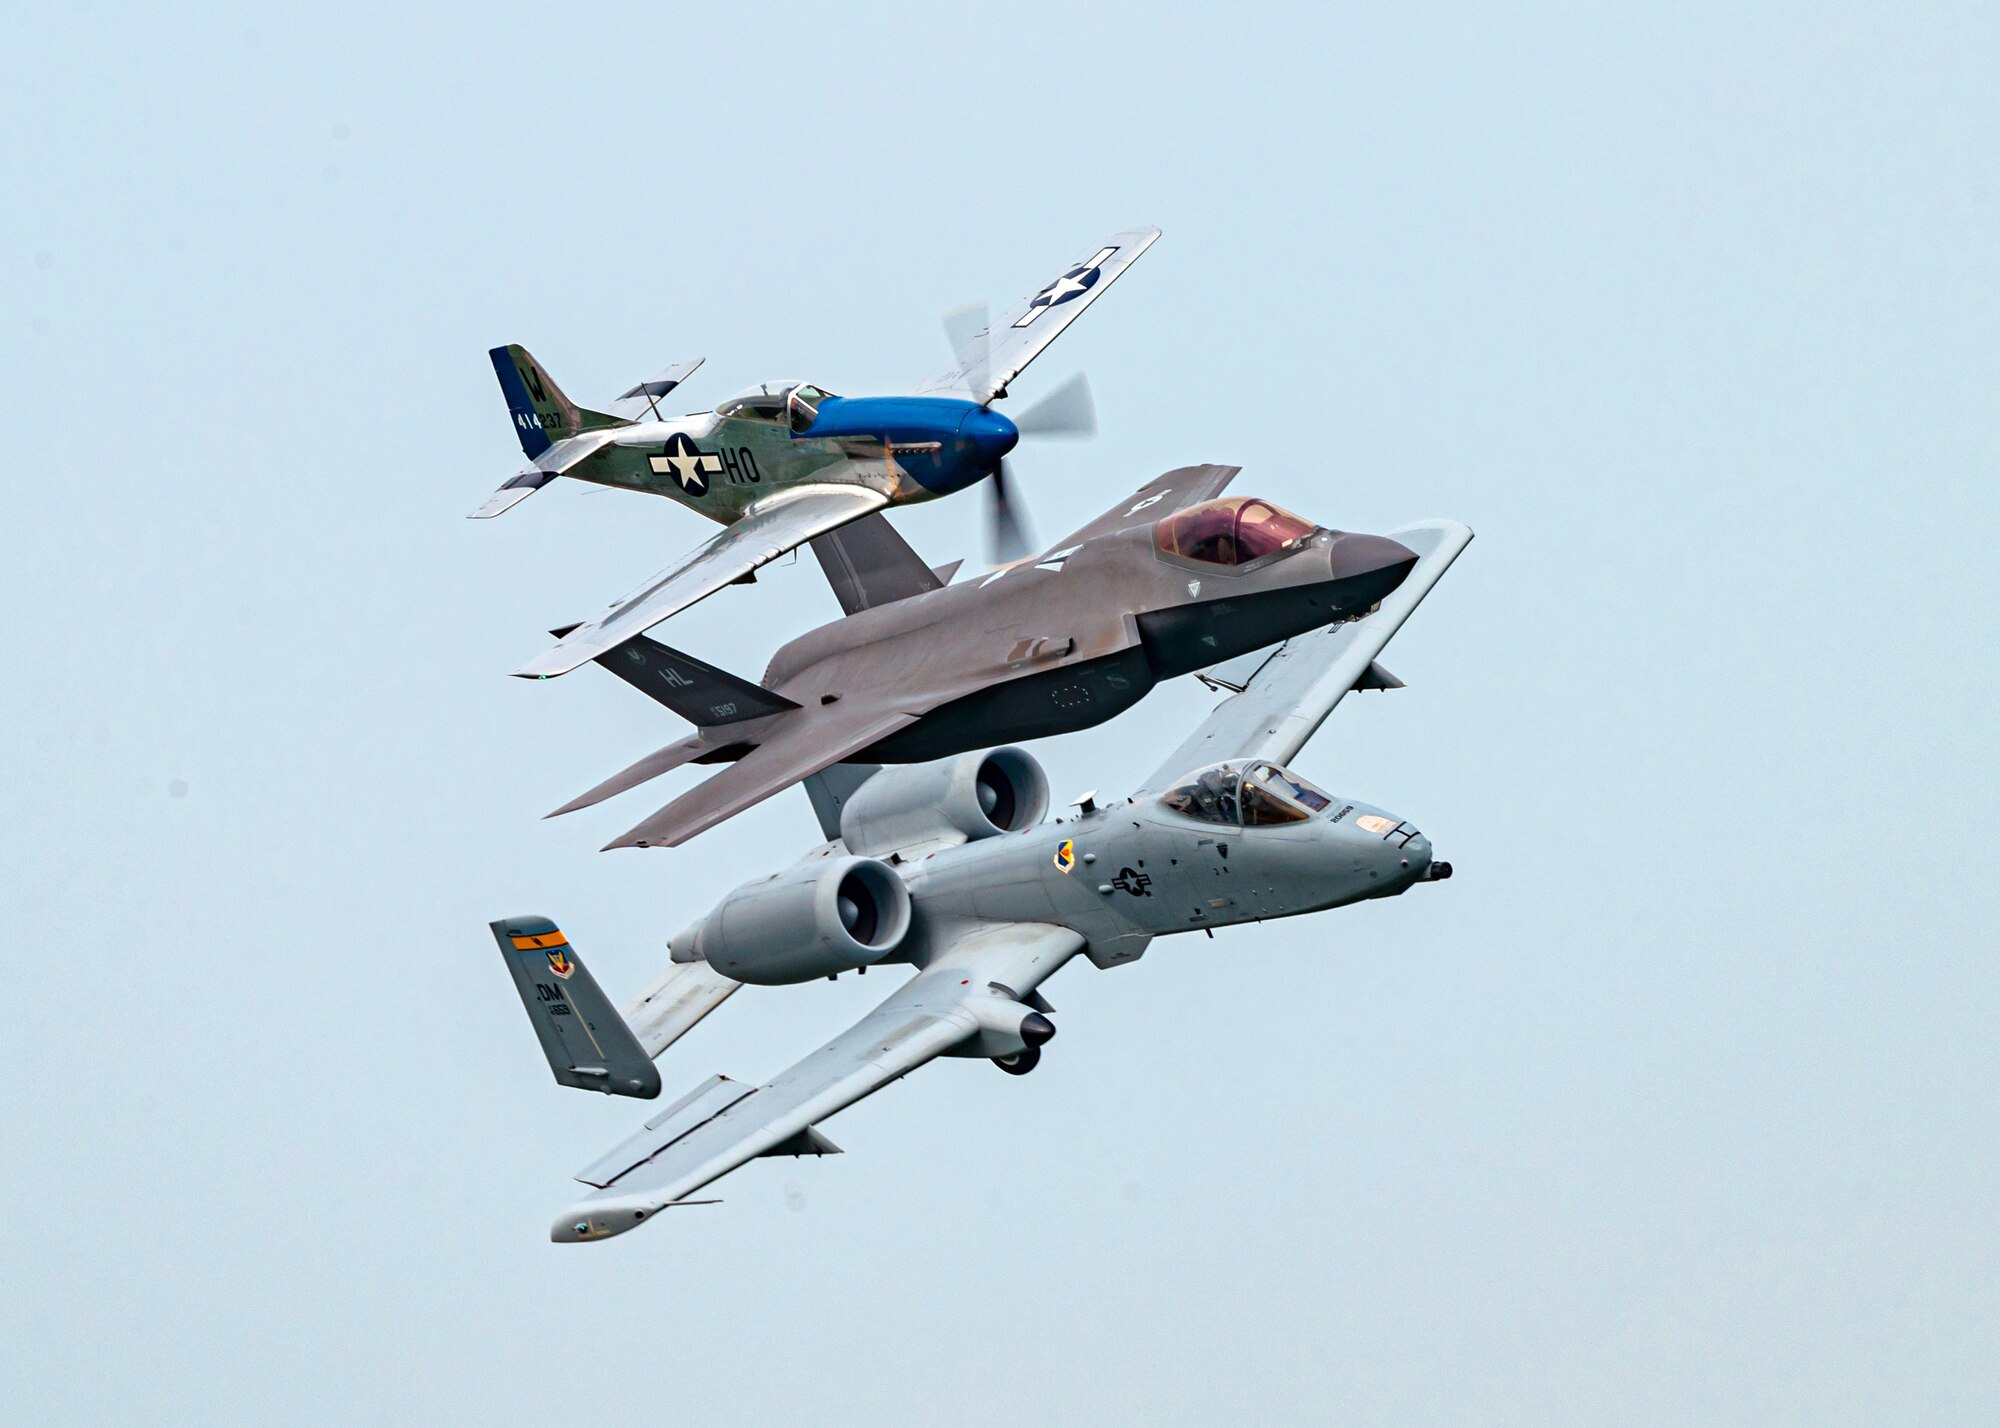 F-35 Demonstration Team at 2021 Thunder over Michigan Air Show